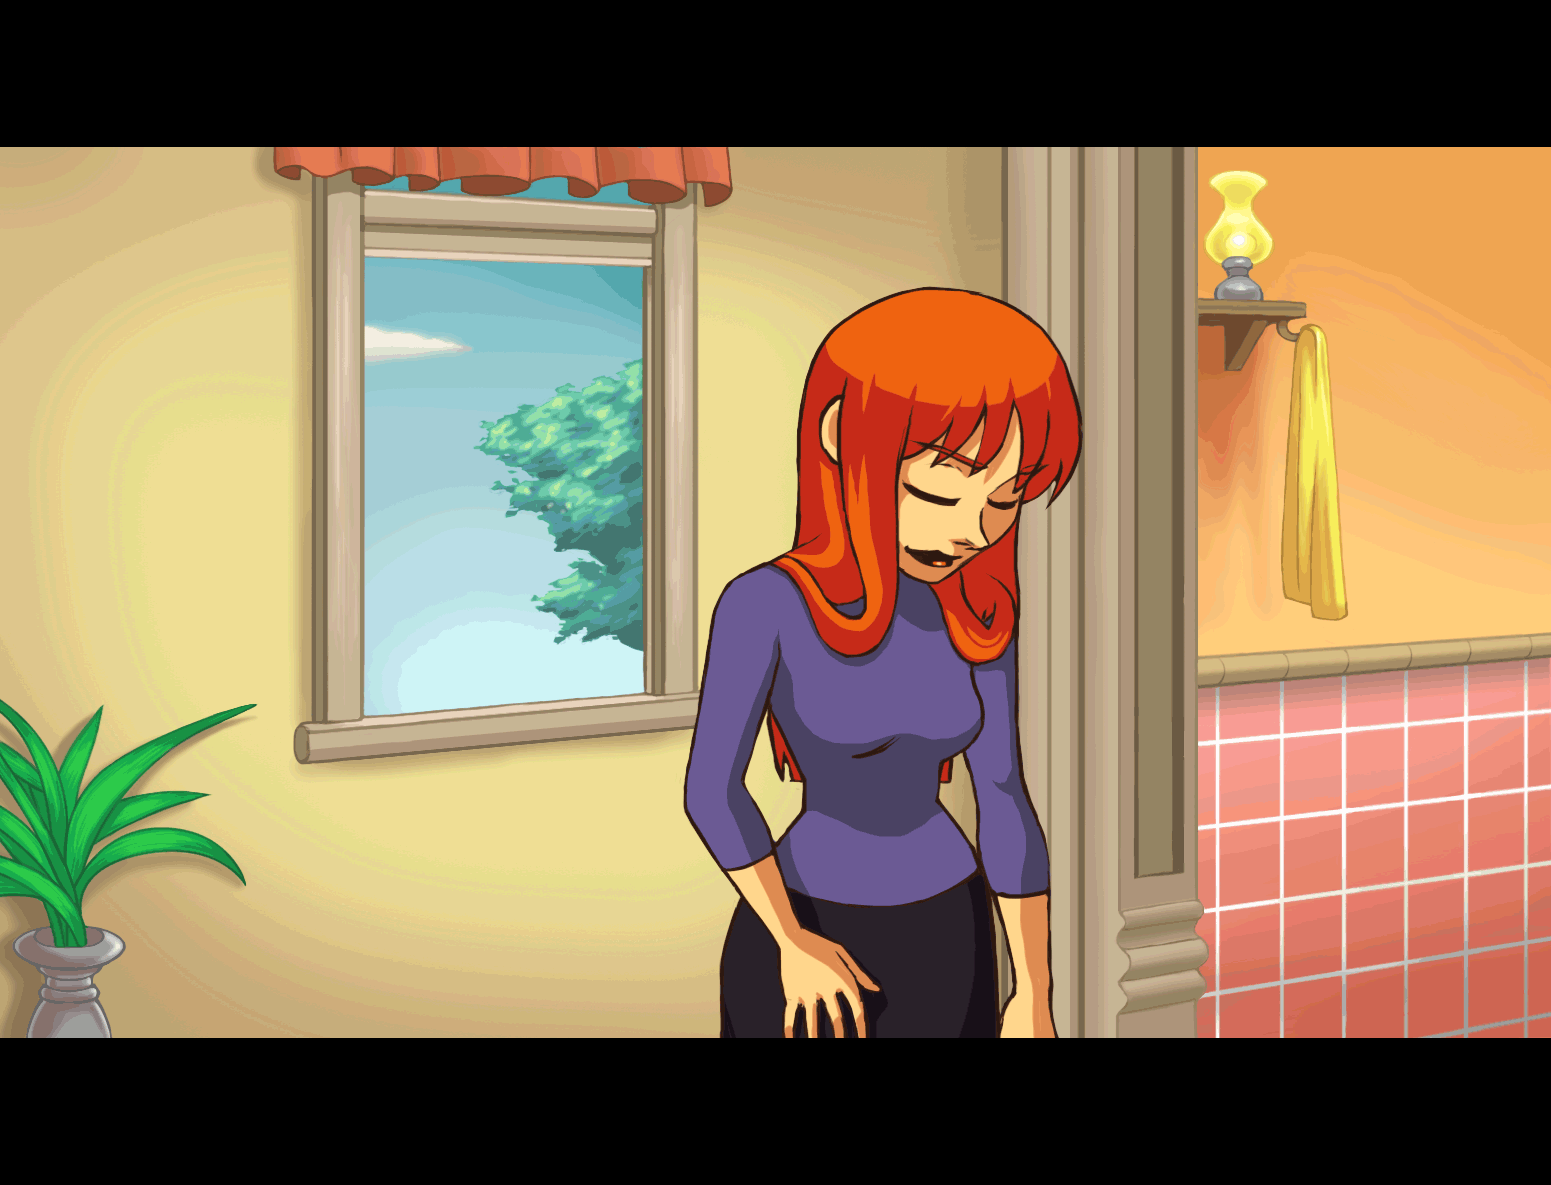 redhairsurprised_final_version_by_yotatouch-d68lp5q (1).gif